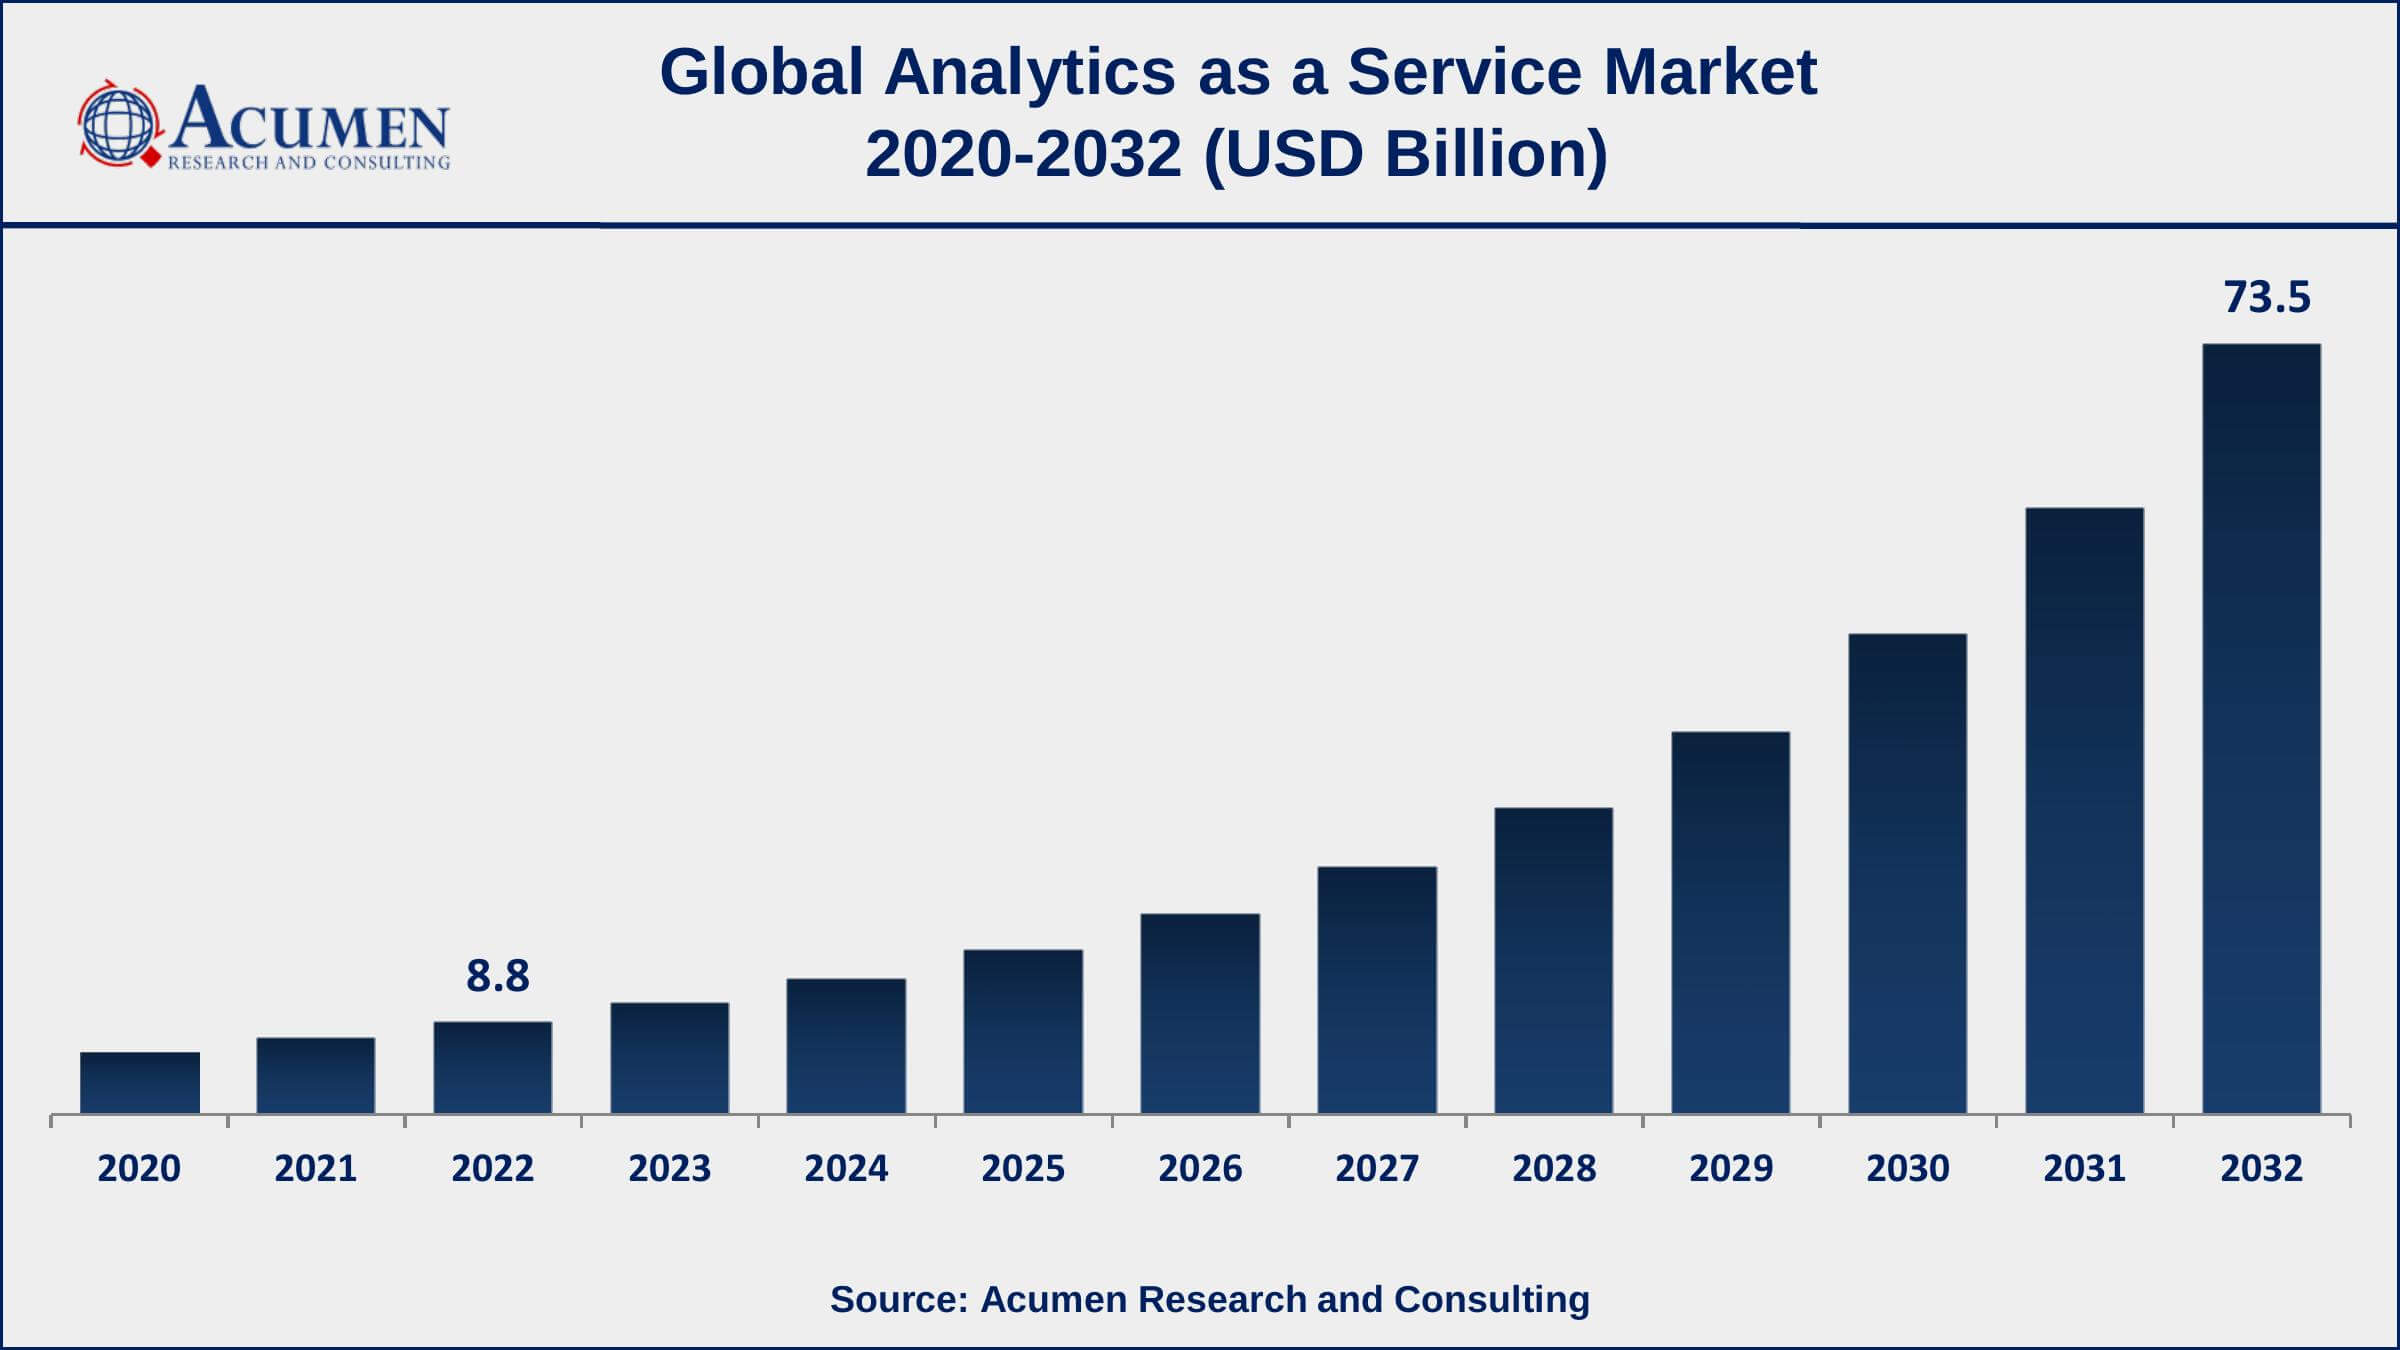 Analytics as a Service Market Drivers